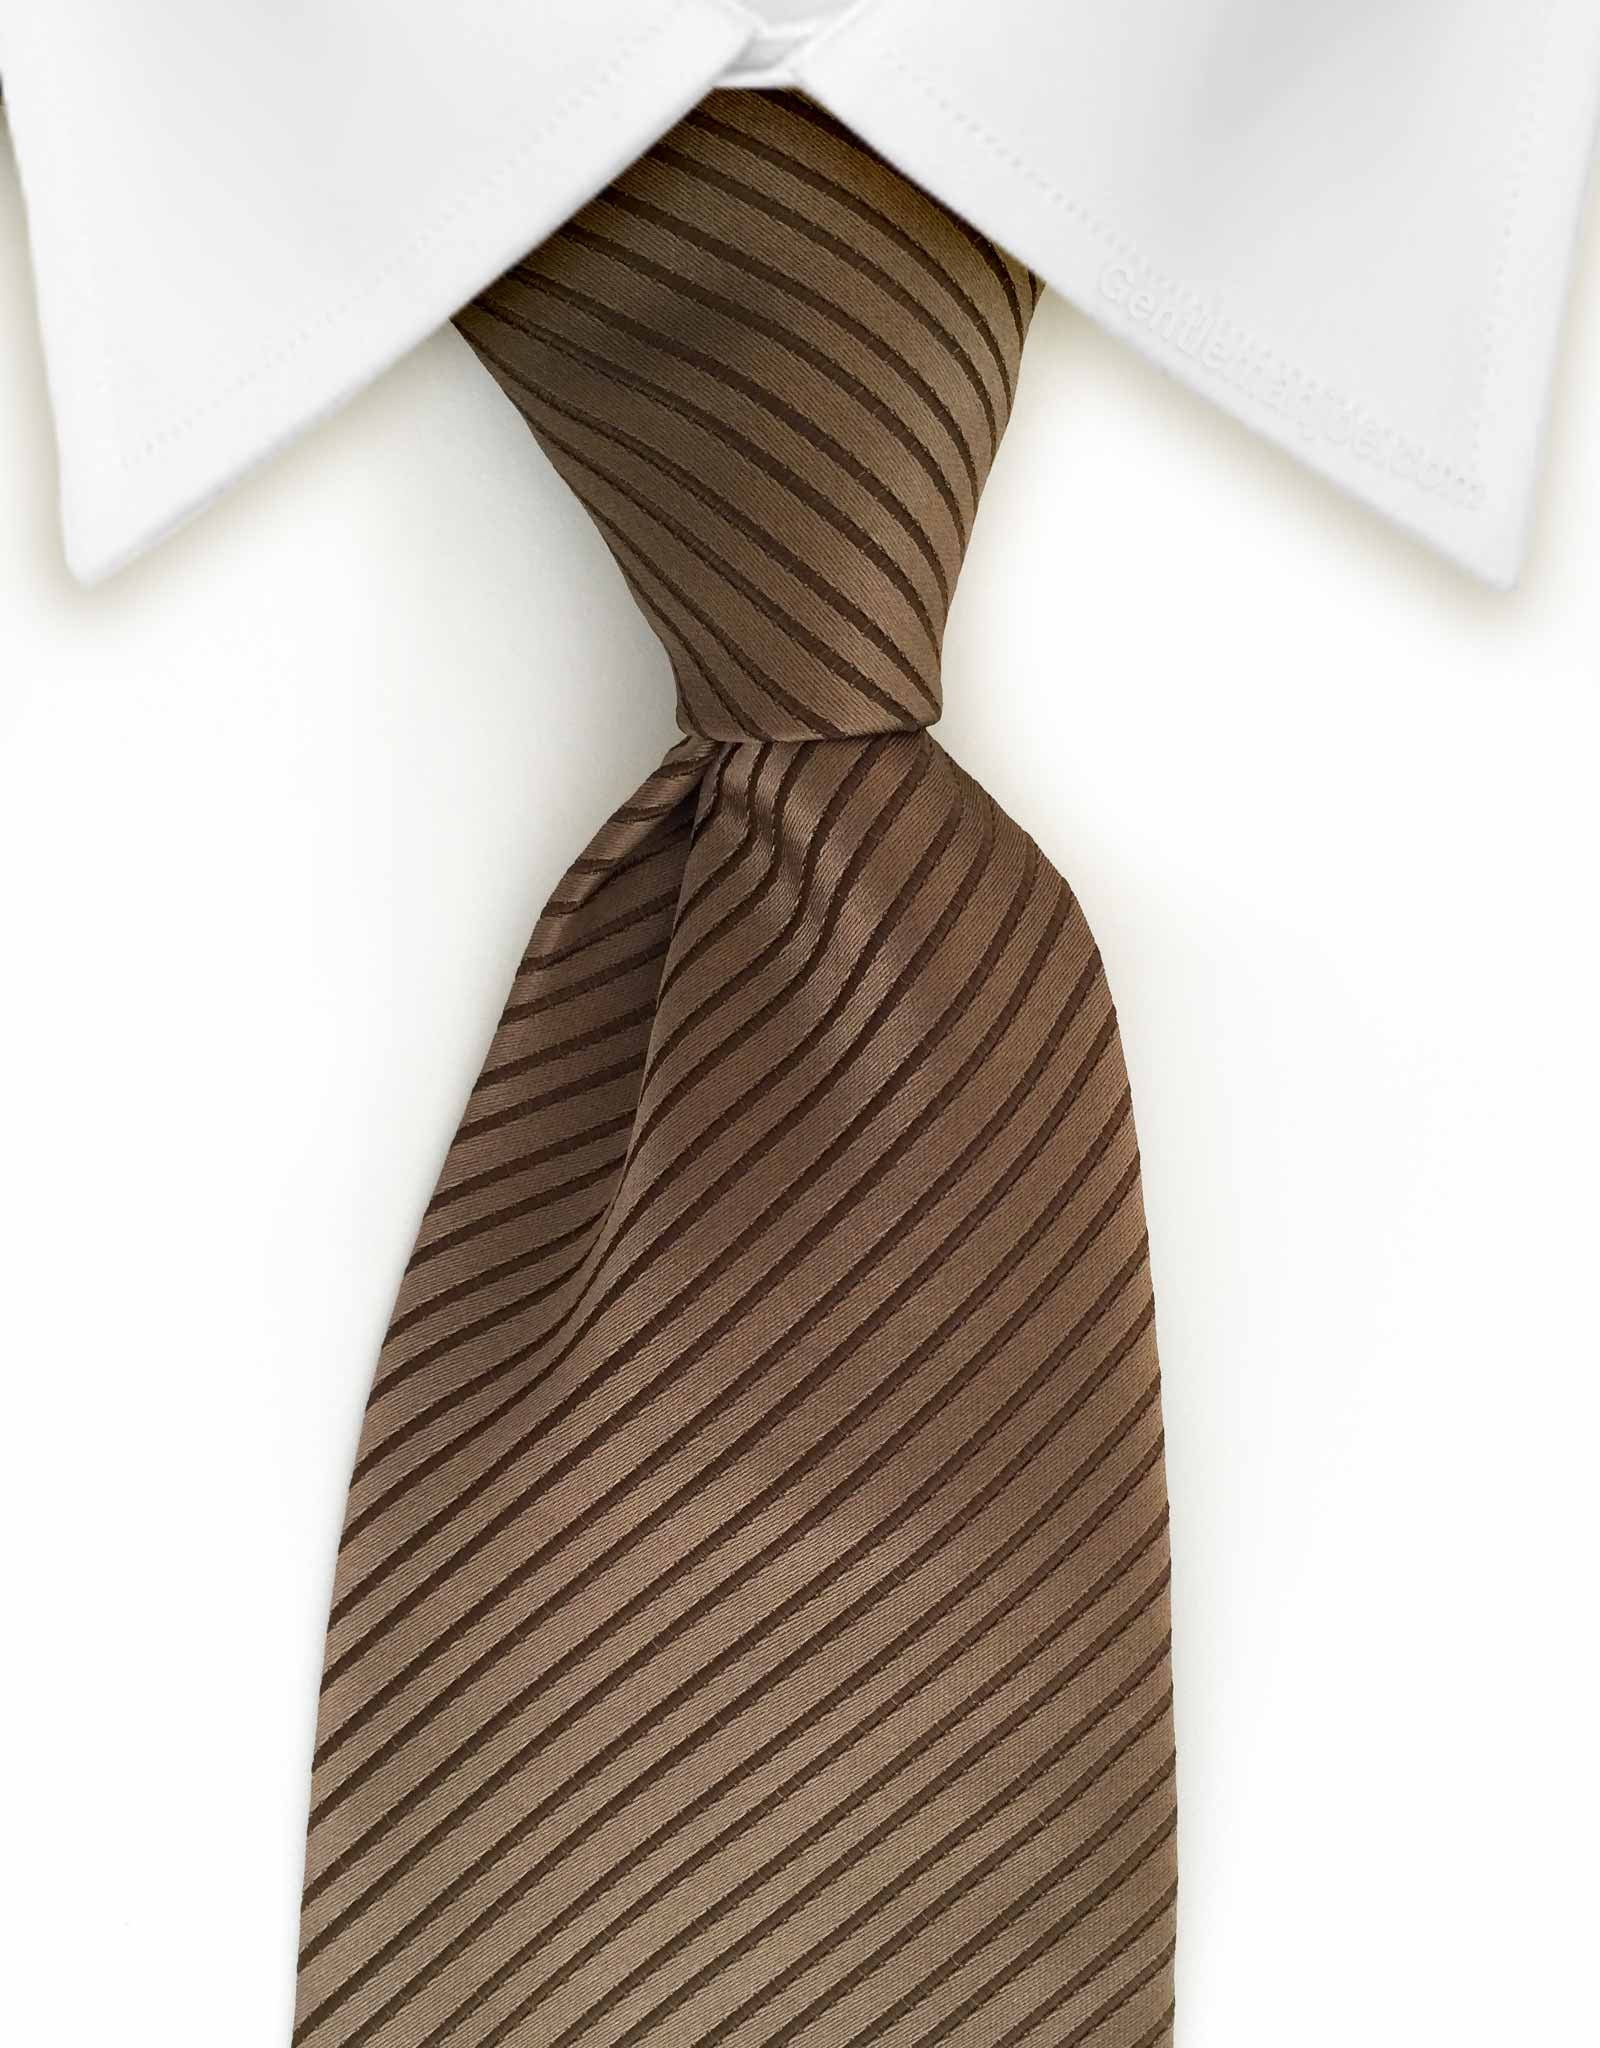 solid brown striped tie